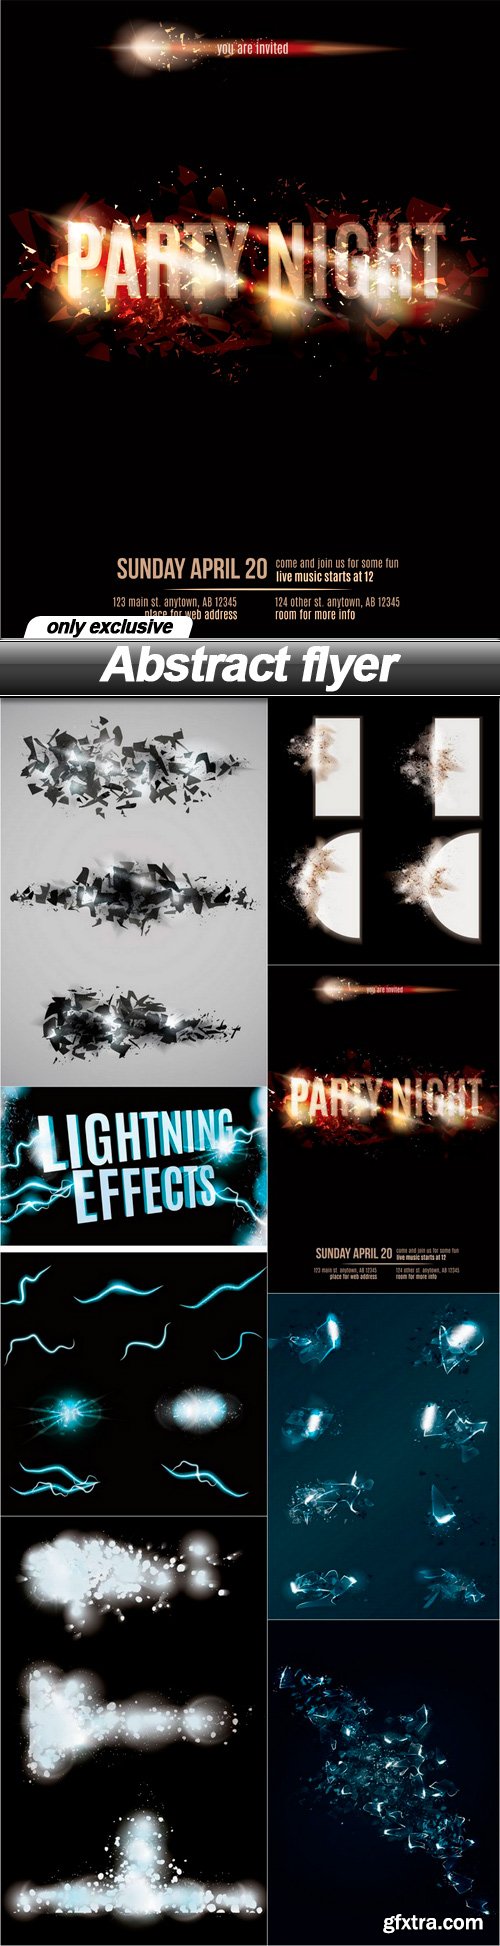 Abstract flyer - 7 EPS